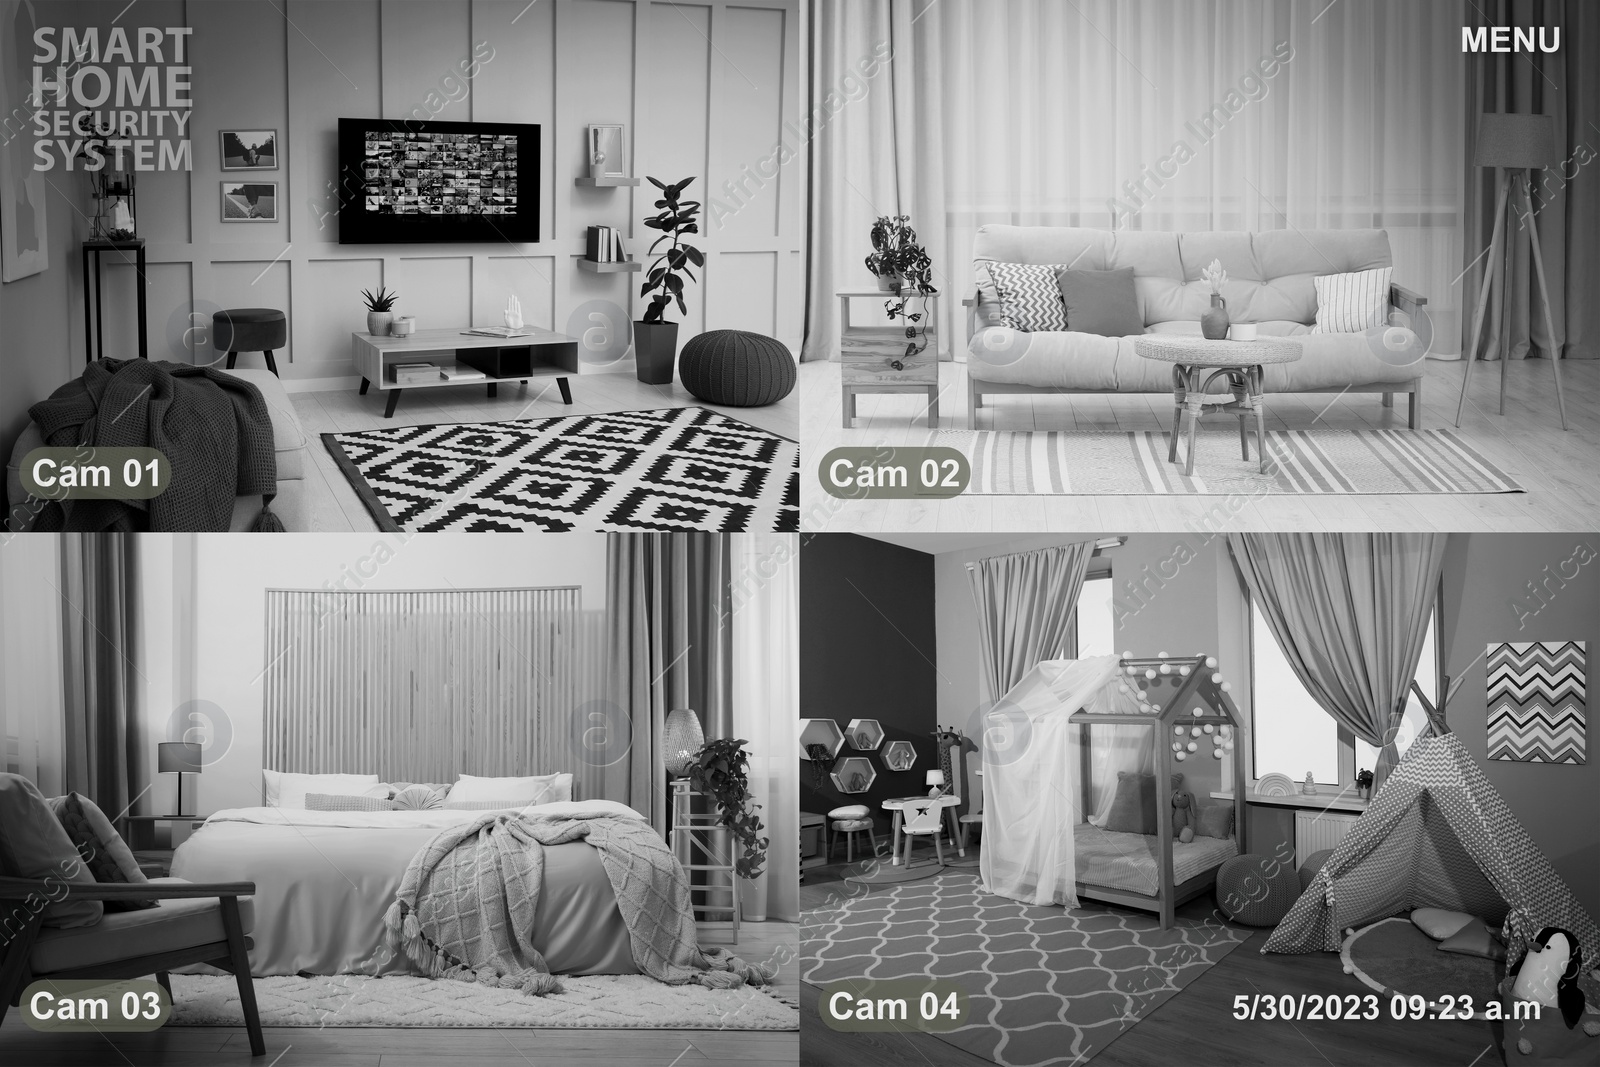 Image of Smart home security system. Different rooms, view from cameras in house